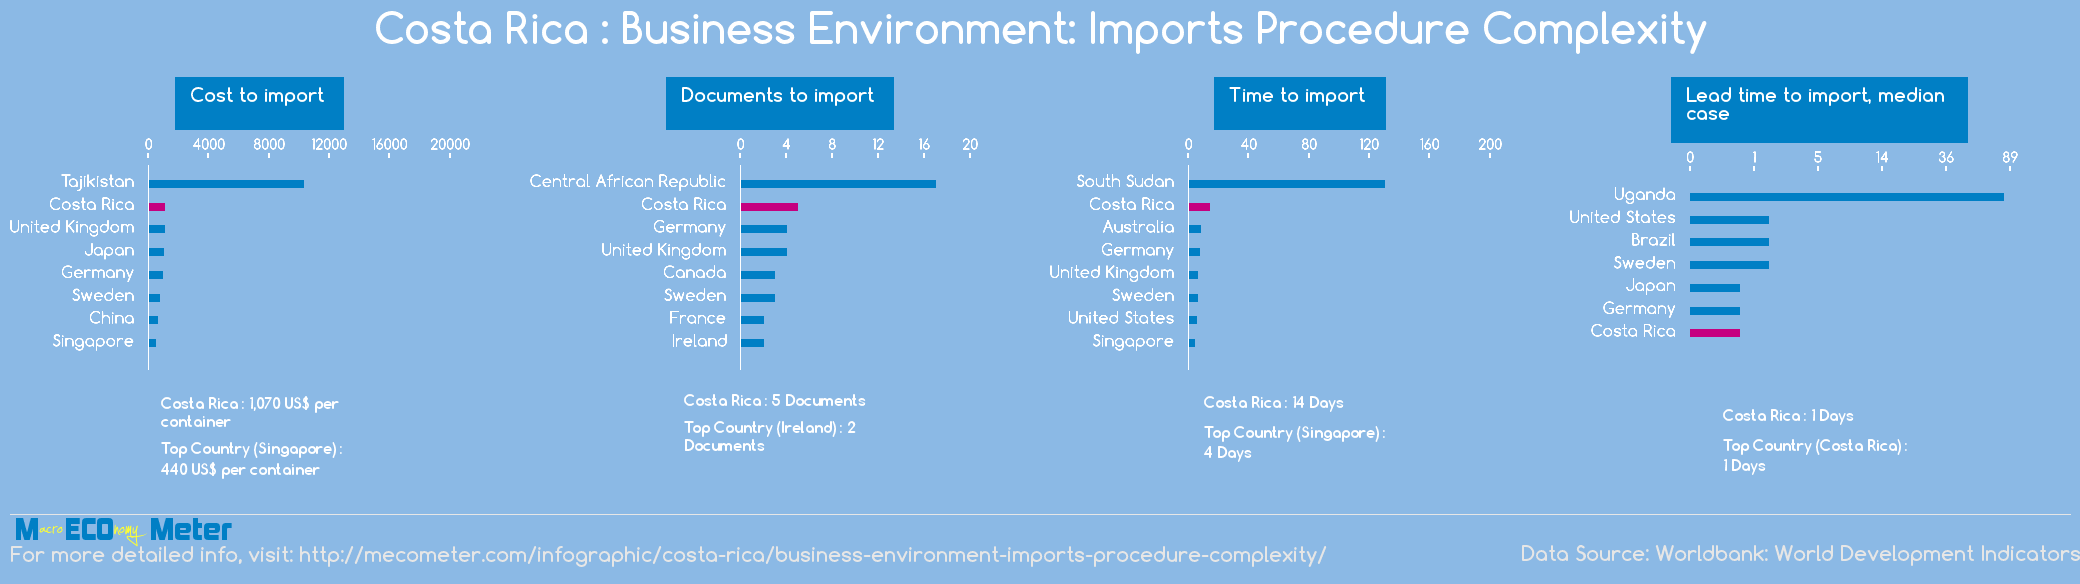 Costa Rica : Business Environment: Imports Procedure Complexity